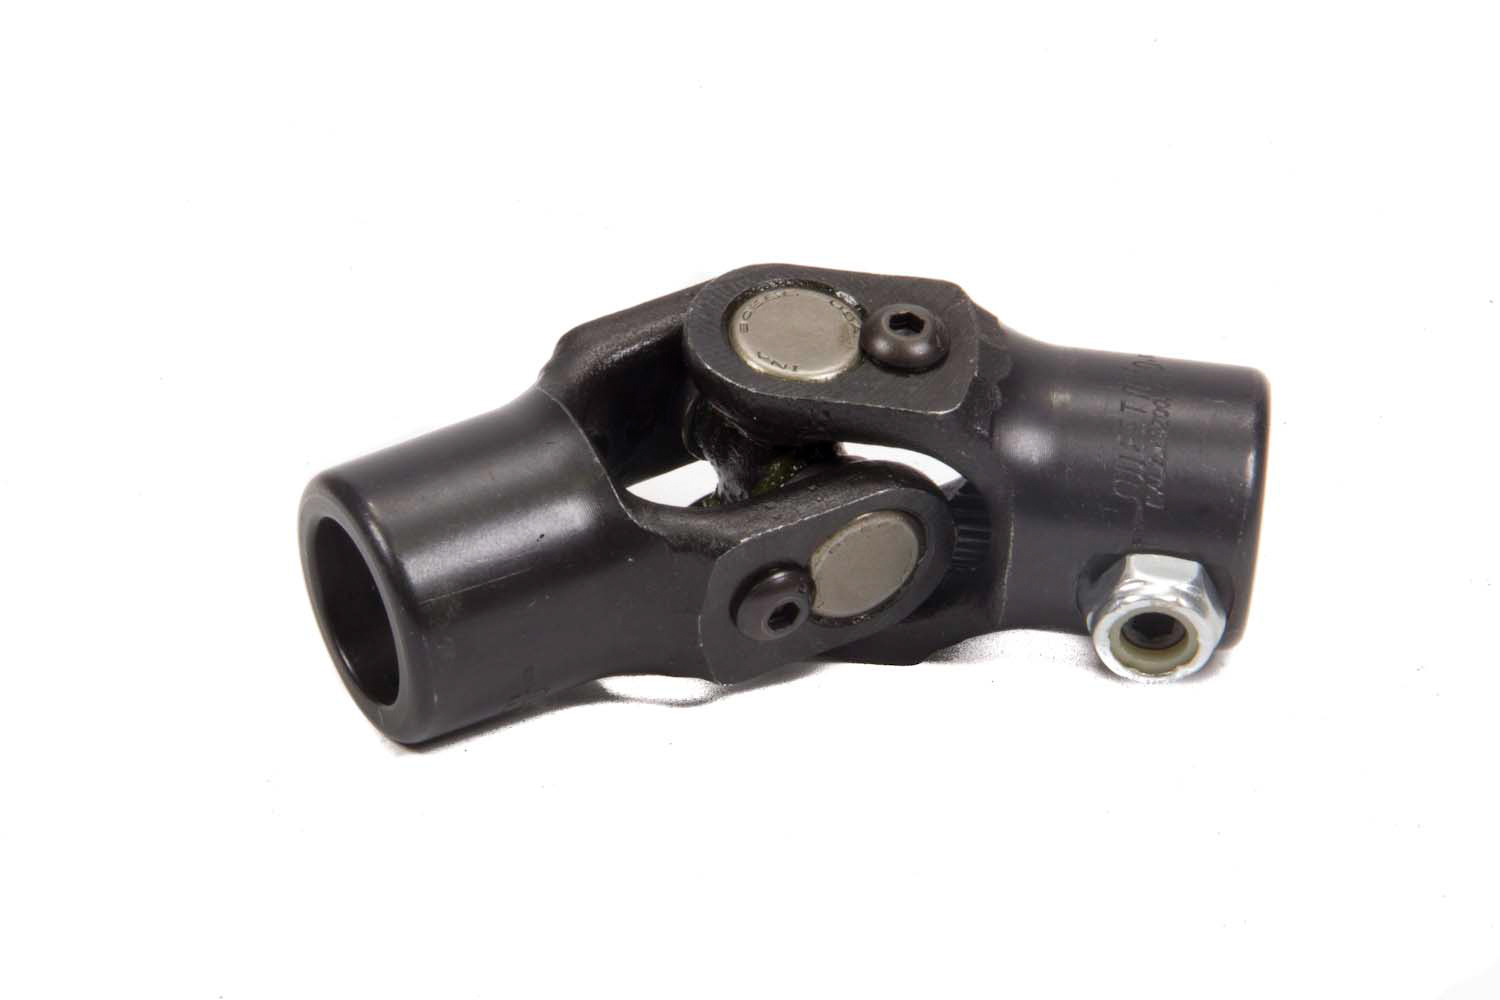 Steering Universal Joint - Single Joint - 5/8 in Smooth Bore to 5/8 in Smooth Bore - Steel - Black Paint - Each